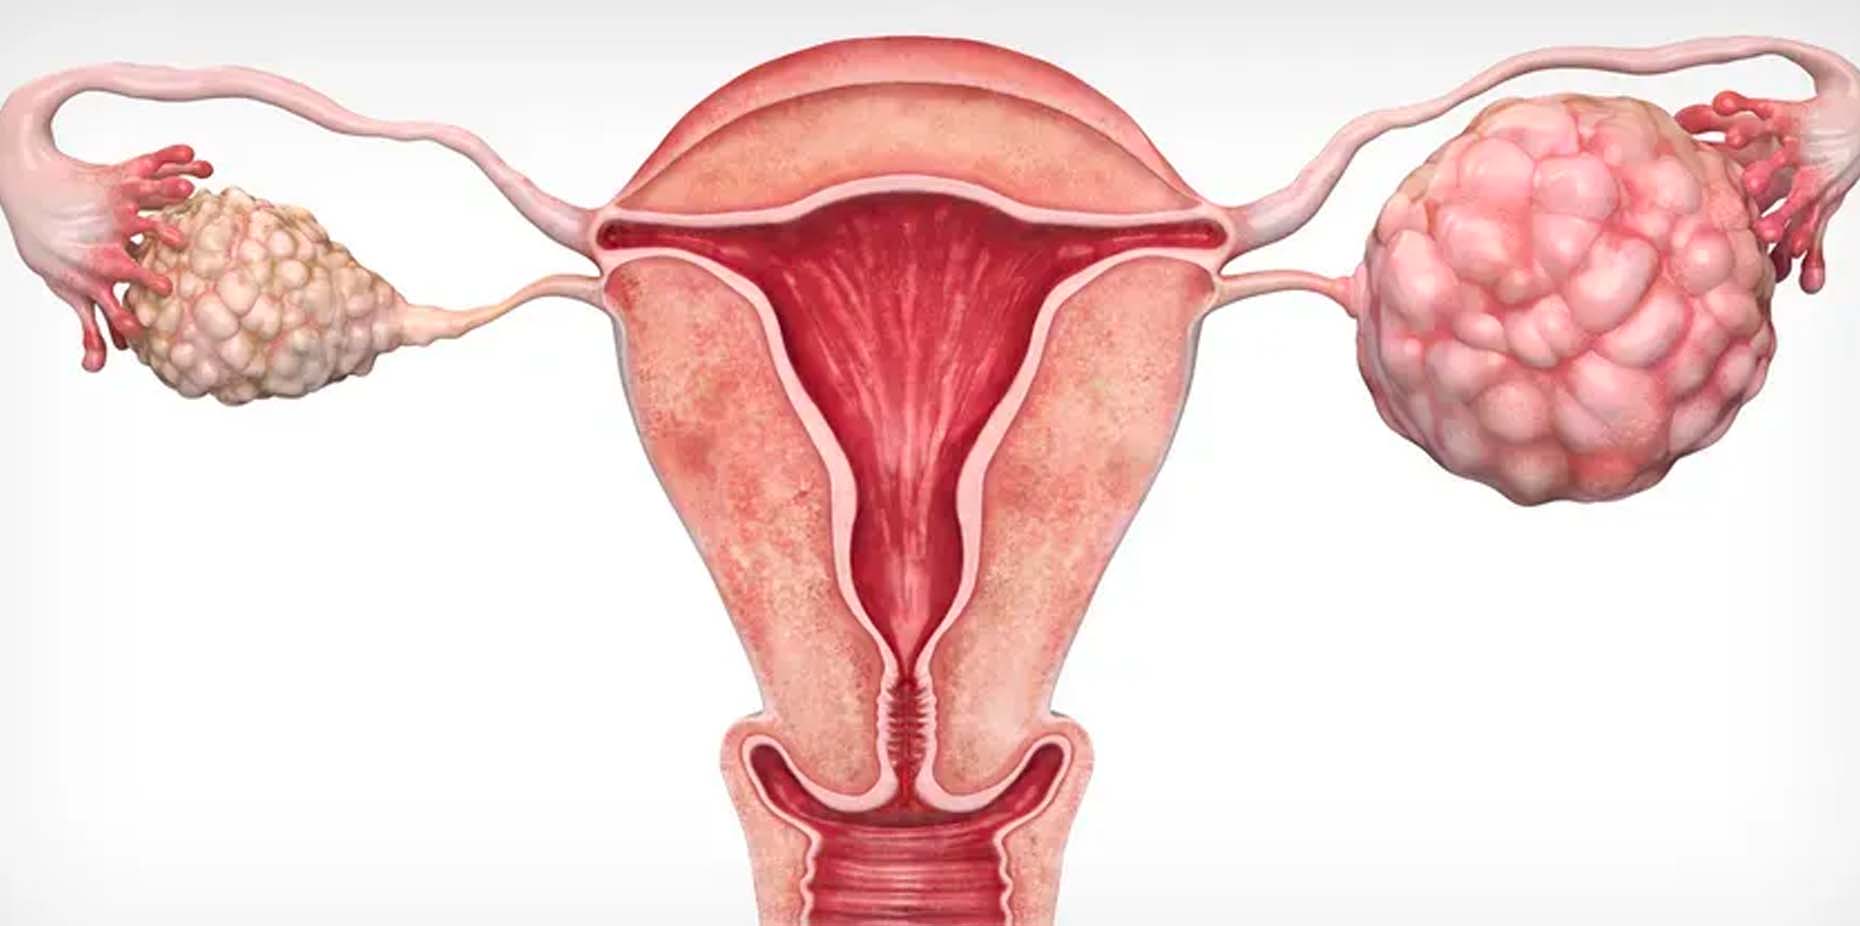 Ovarian Cancer: Types, Risk factors, Symptoms, and Treatment